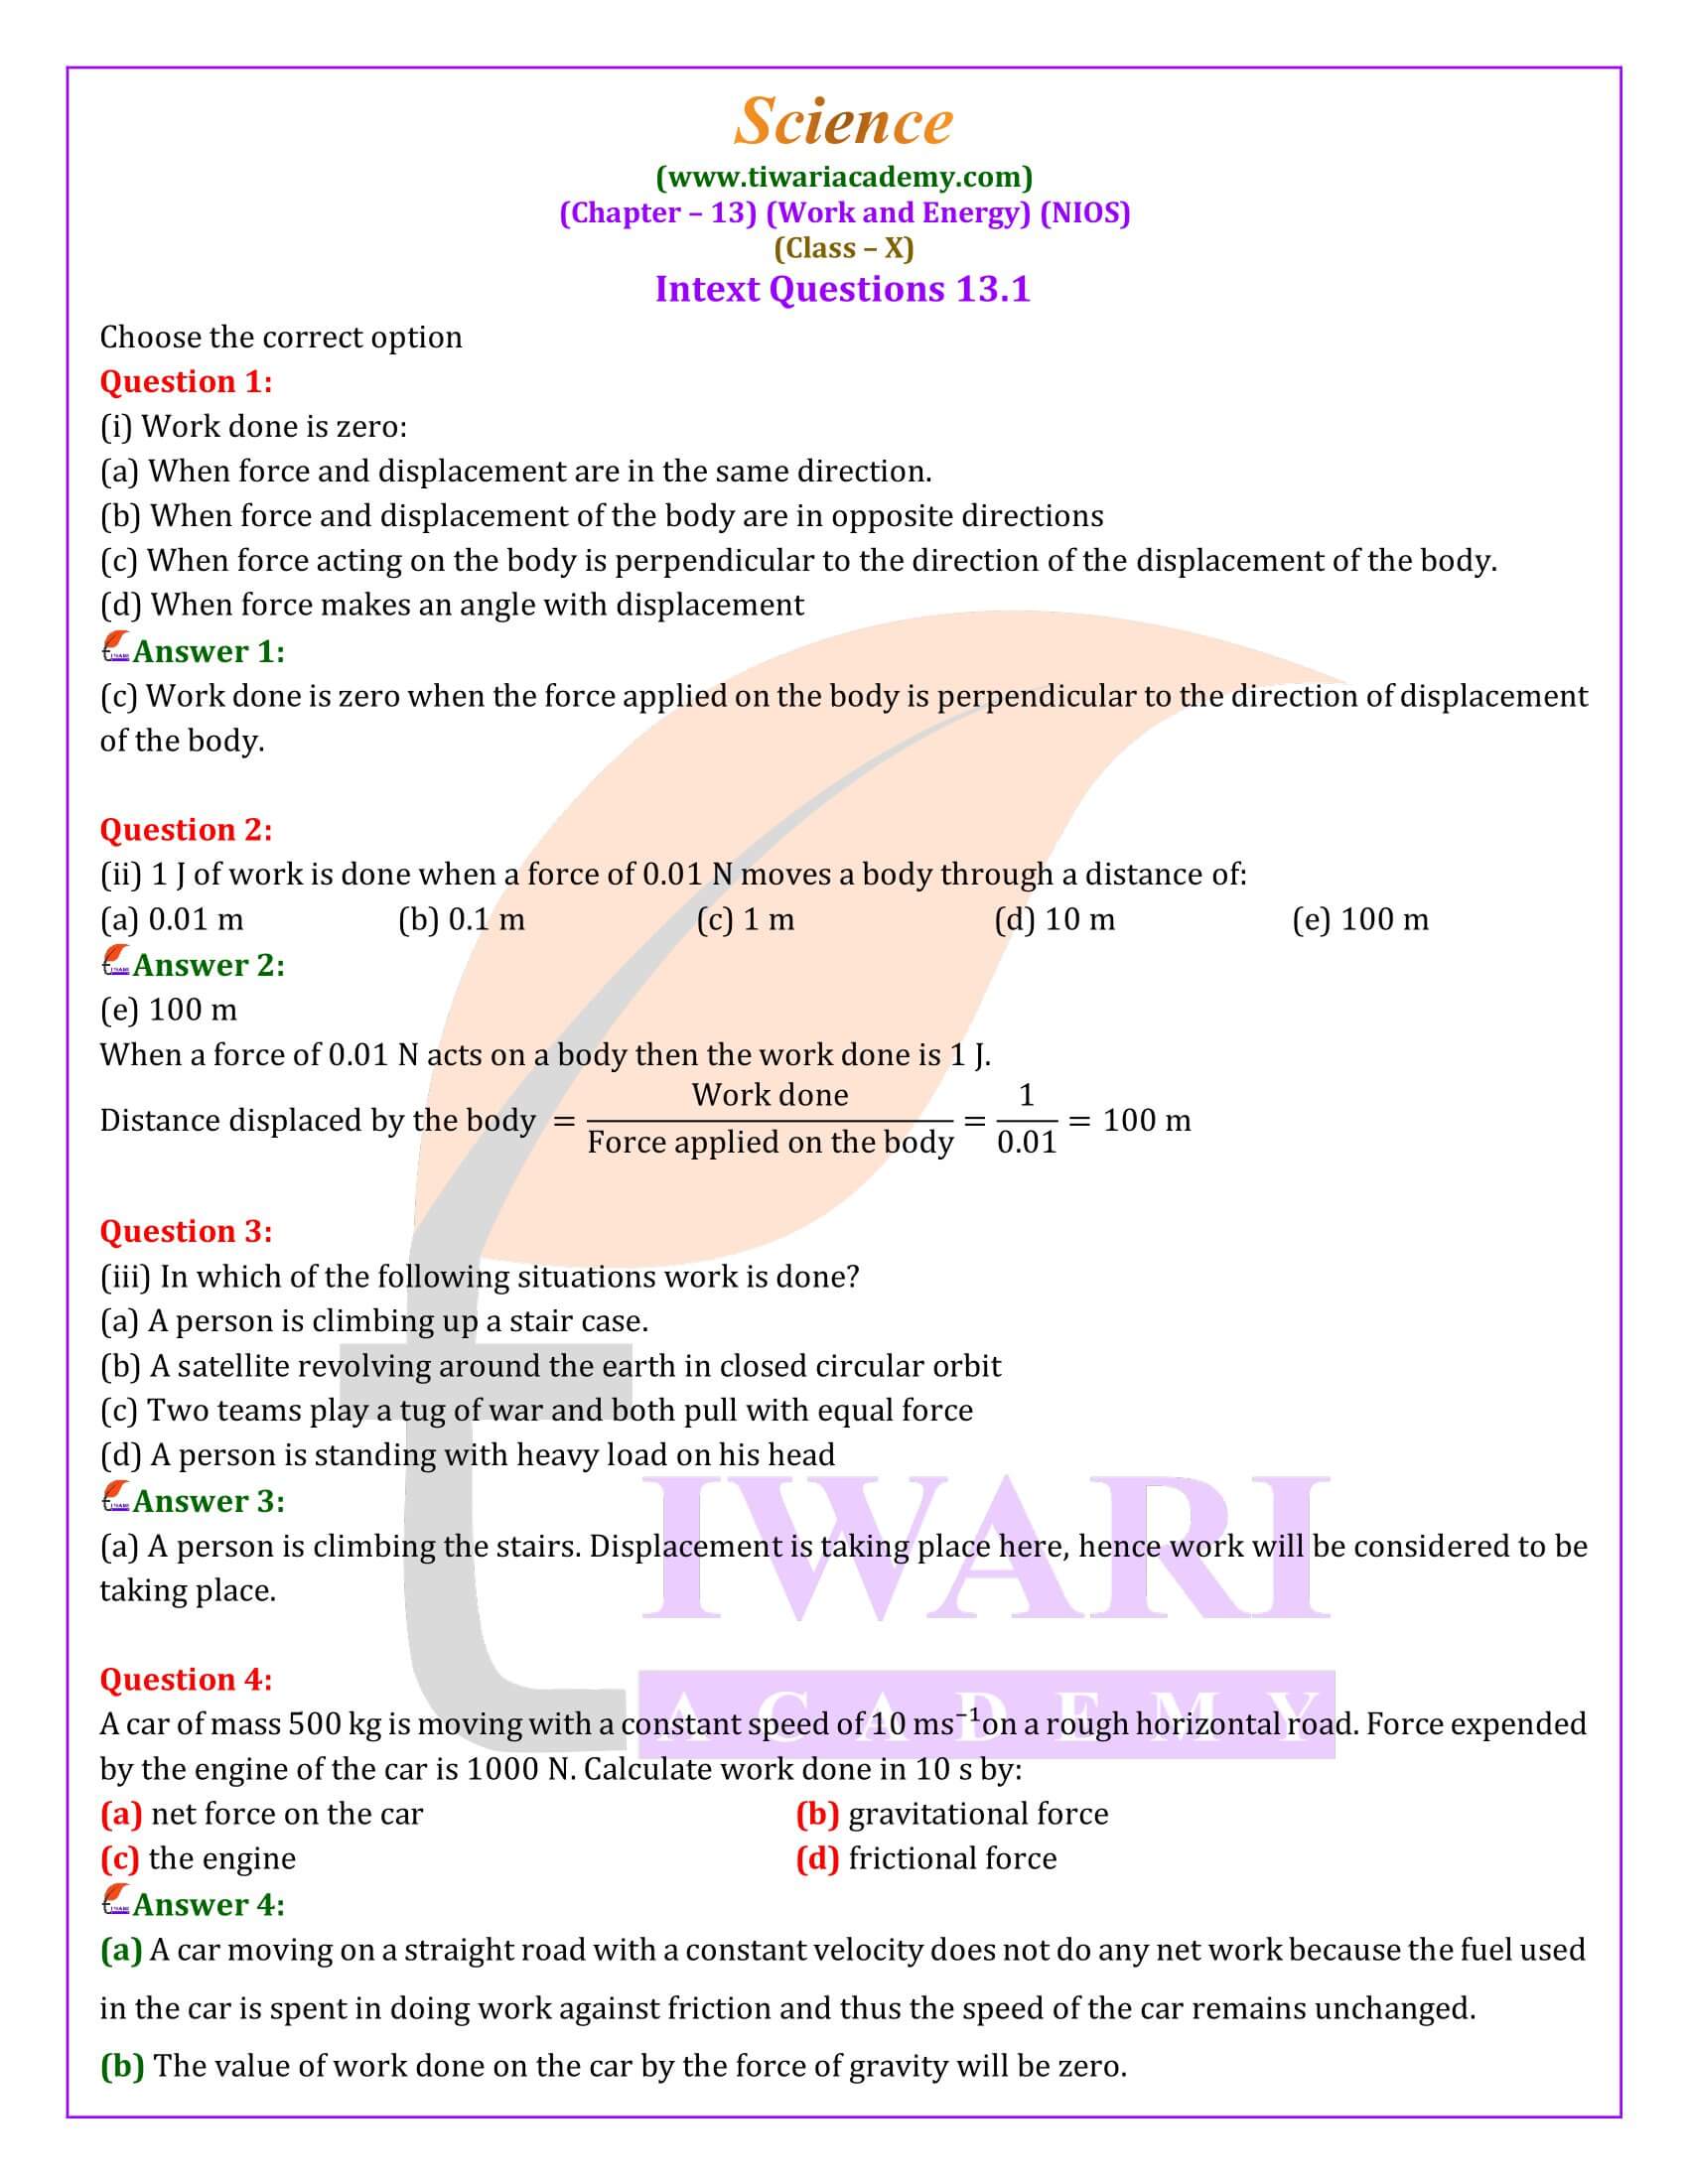 NIOS Class 10 Science Chapter 13 Work and Energy Question Answers